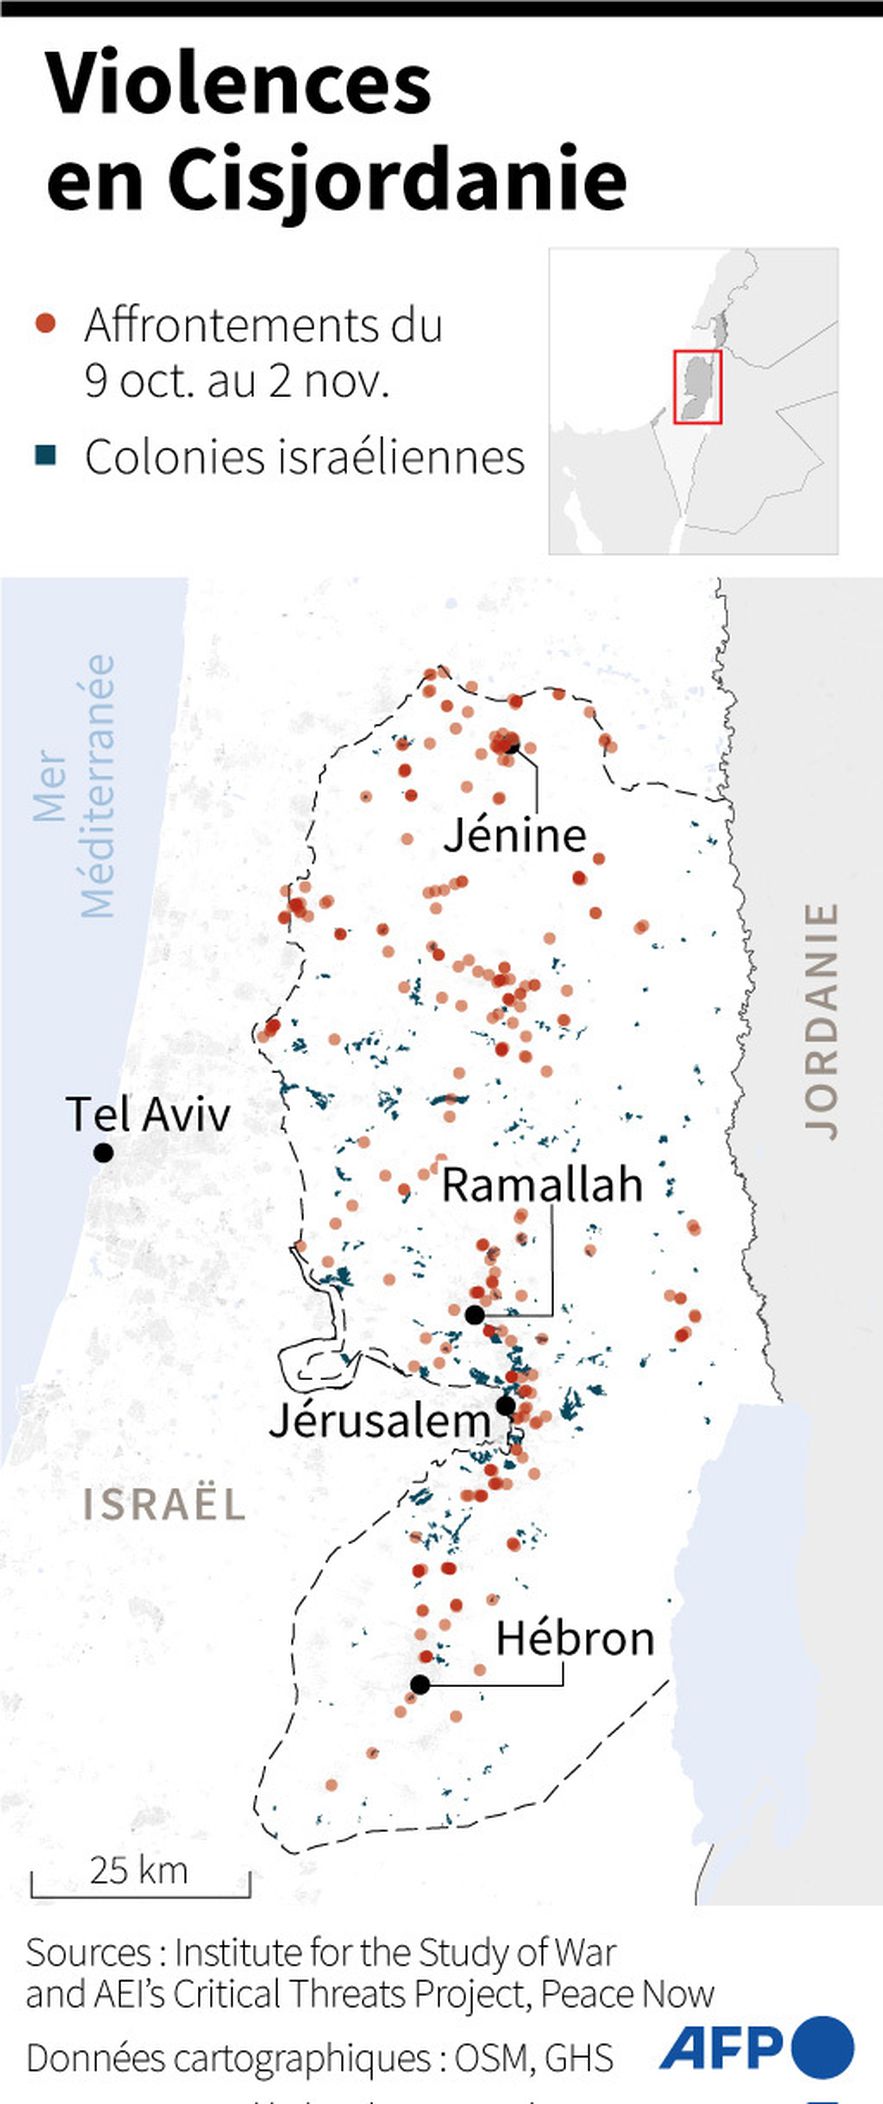 Violence in the West Bank